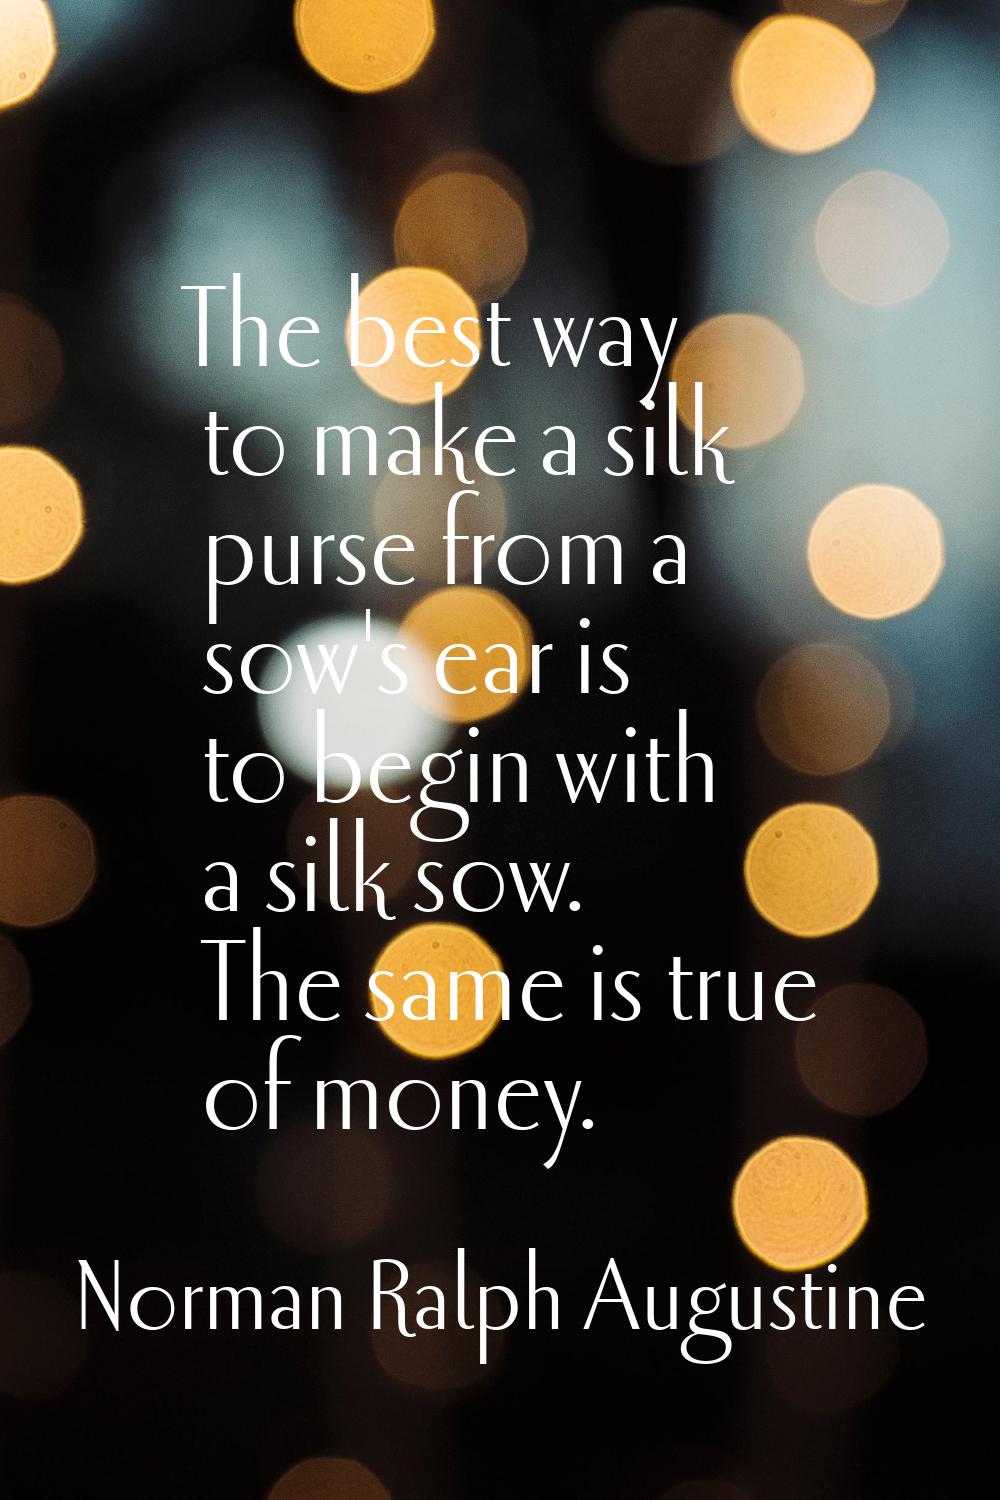 The best way to make a silk purse from a sow's ear is to begin with a silk sow. The same is true of